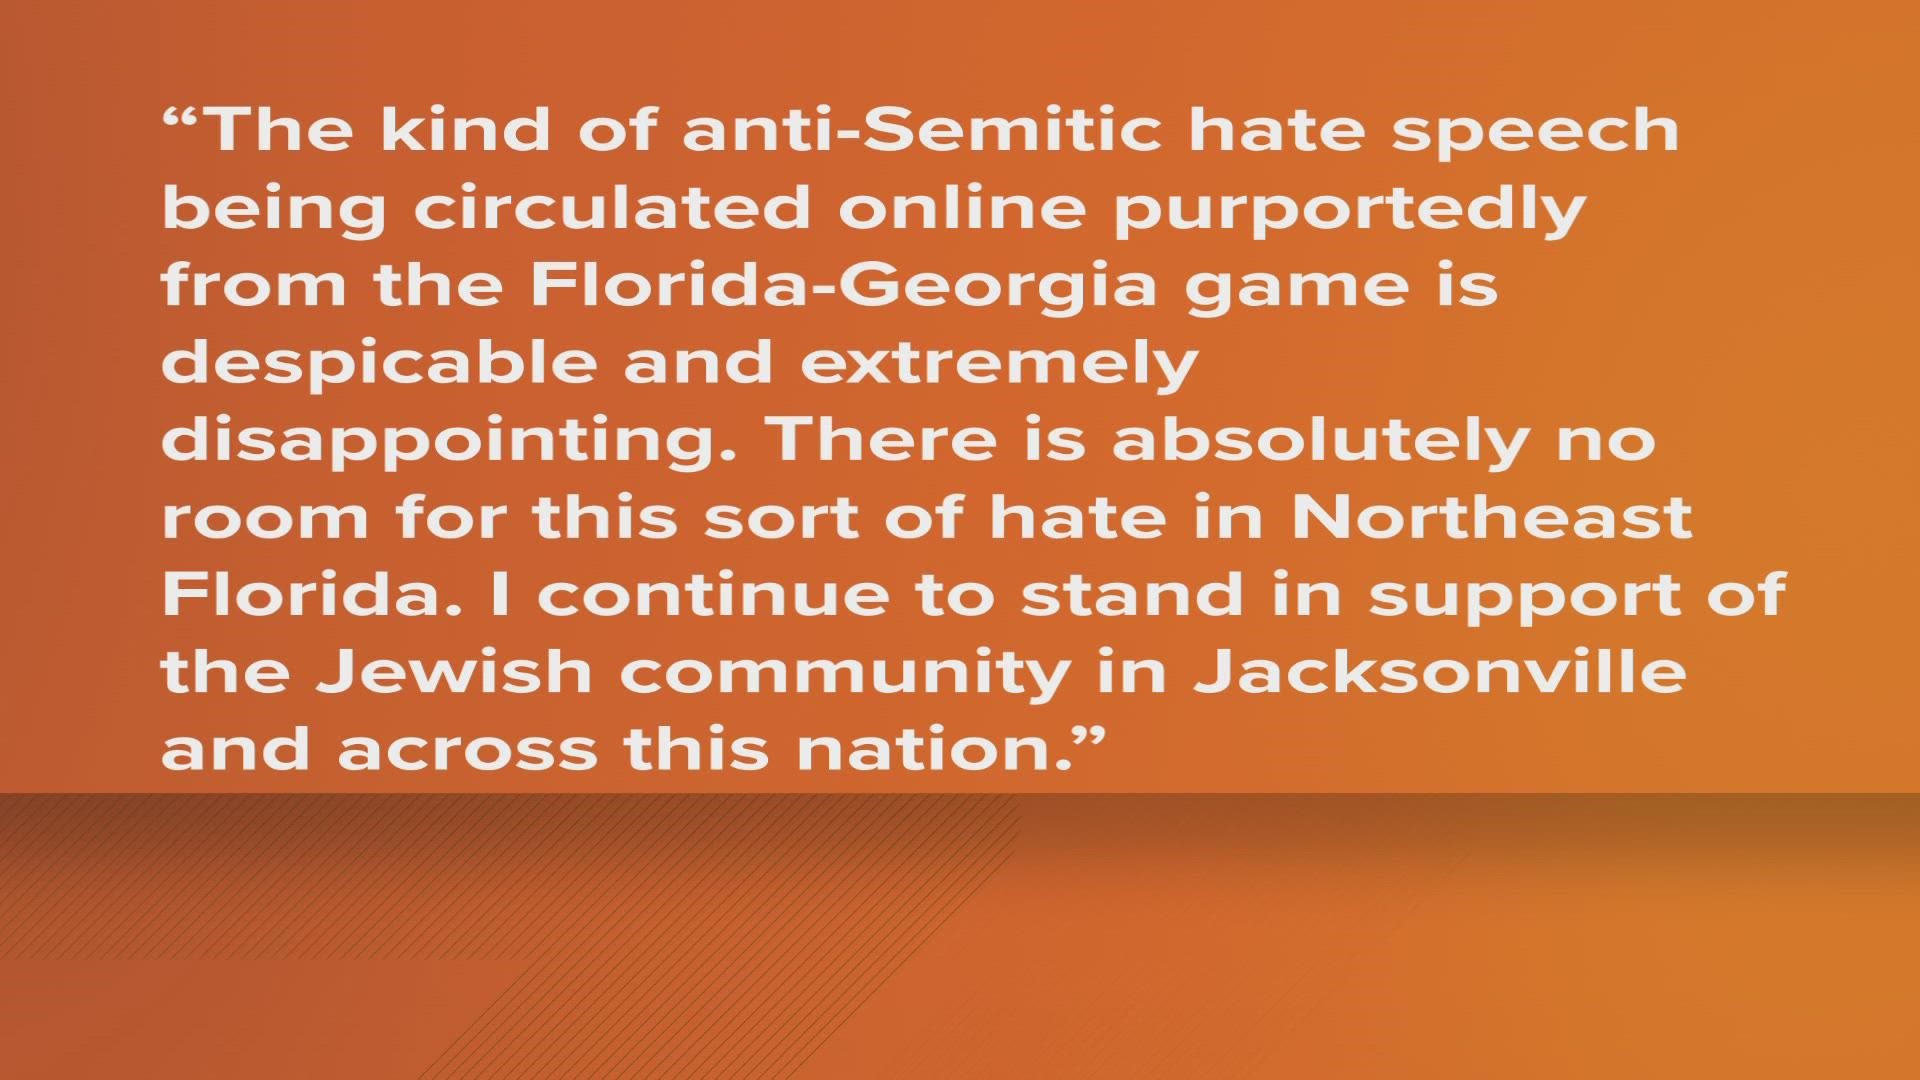 The City of Jacksonville has been plagued by several instances of anti-Semitism in the last week.